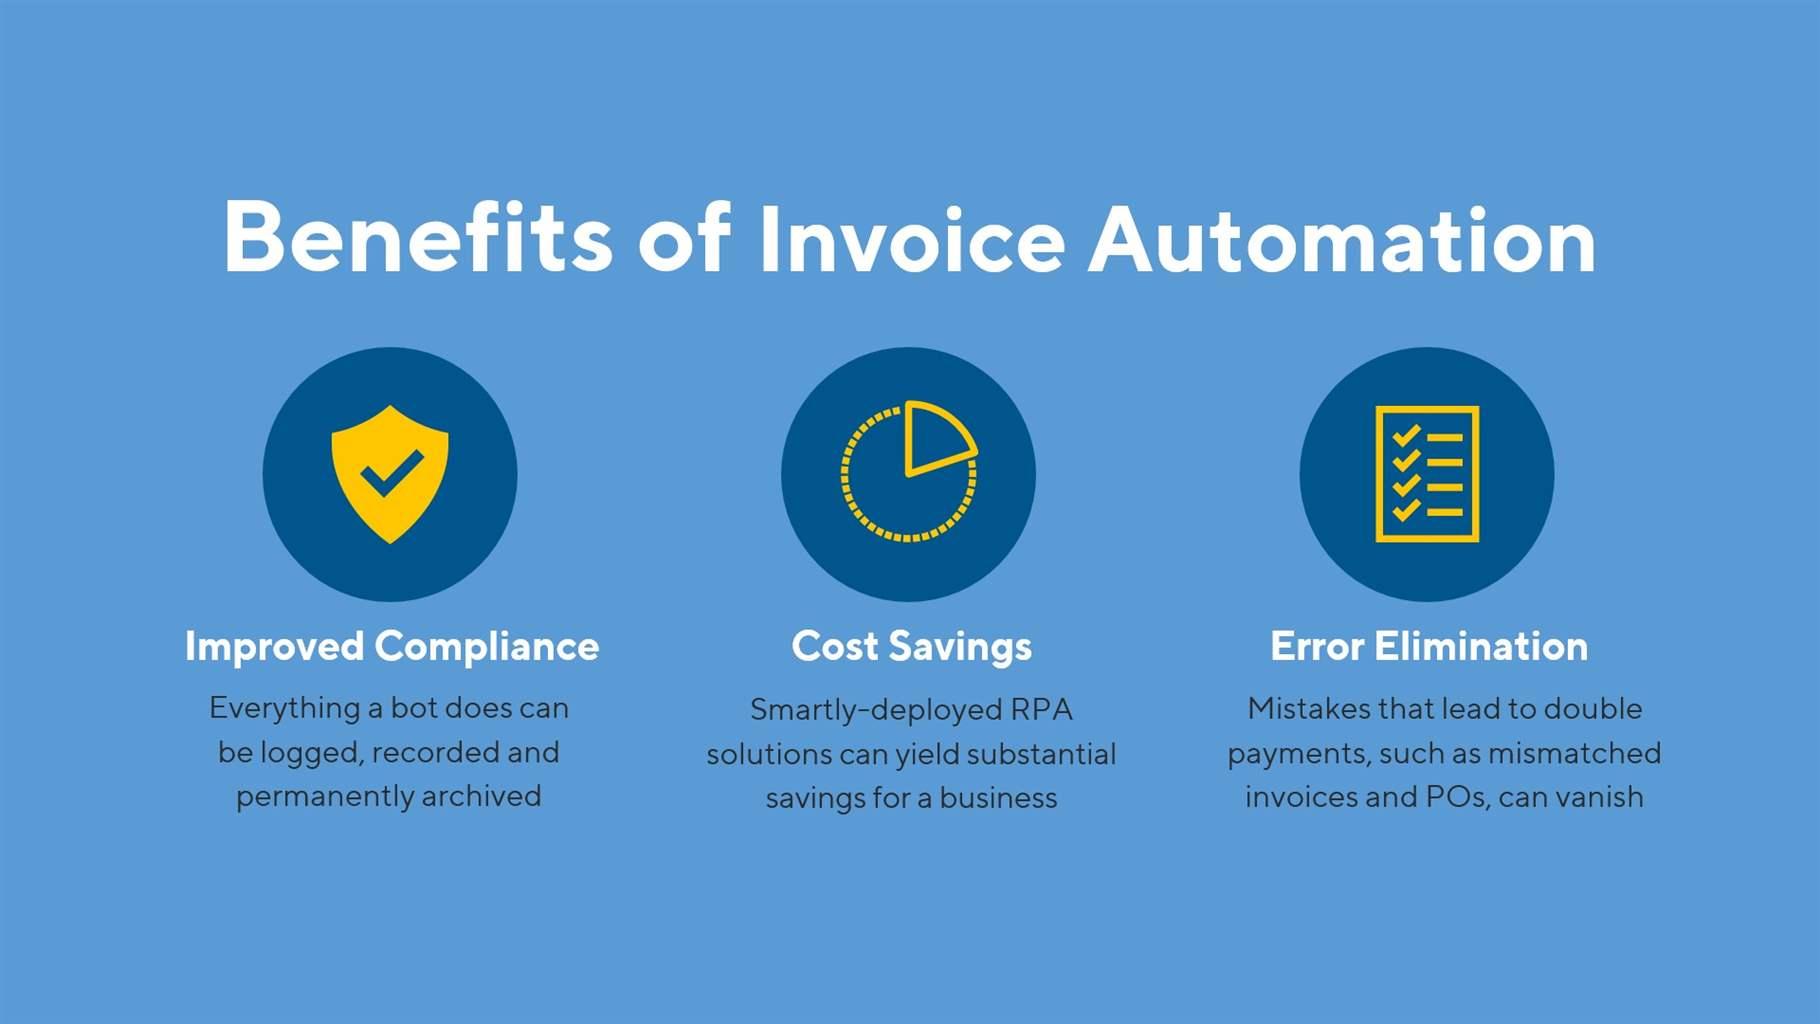 Benefits of Invoice Automation.